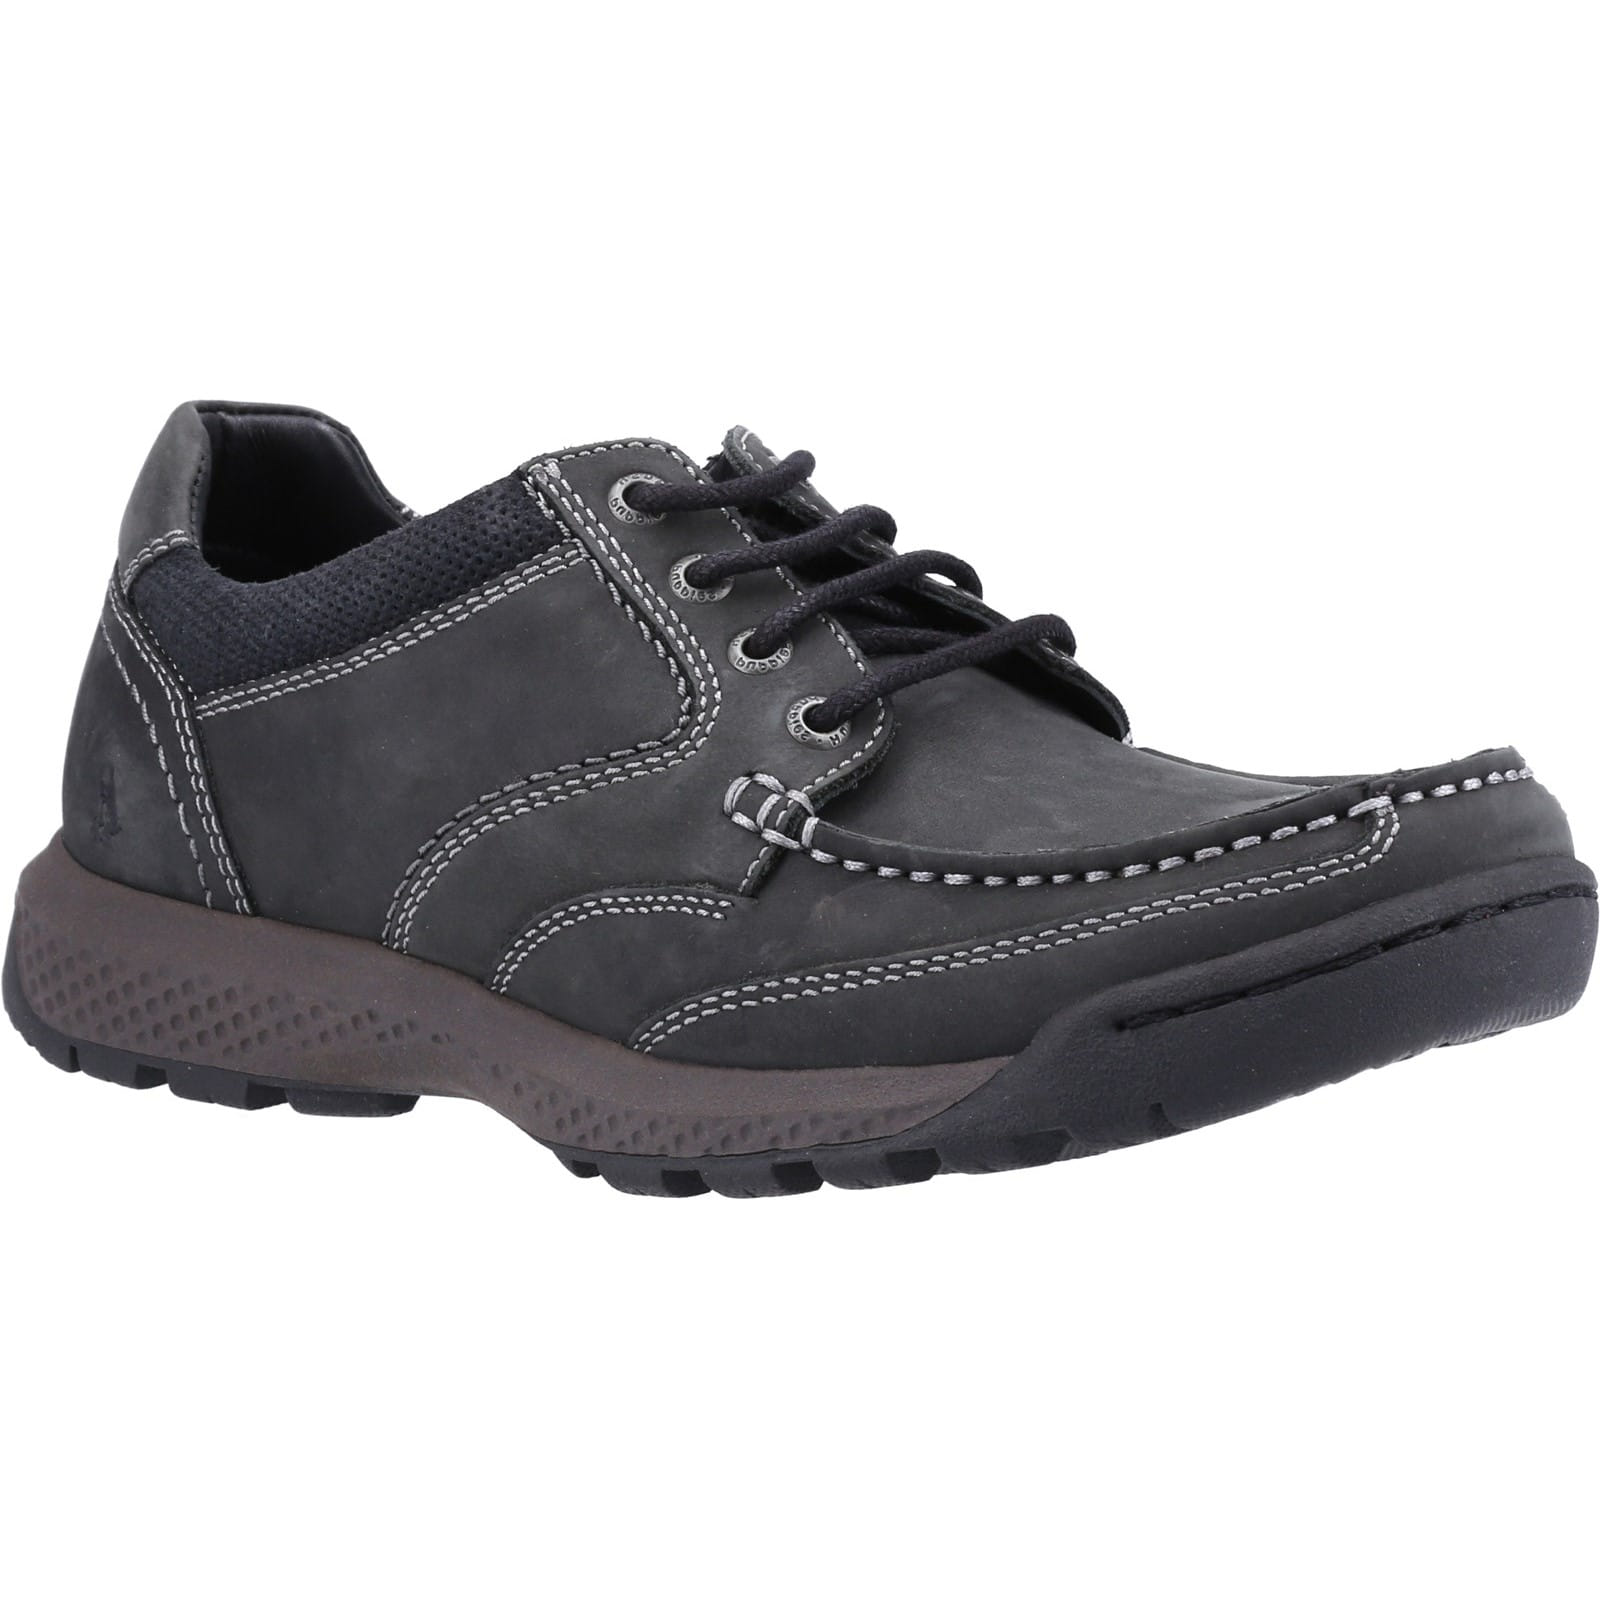 Hush Puppies Men's Dominic Lace Up Leather Shoes - UK 7